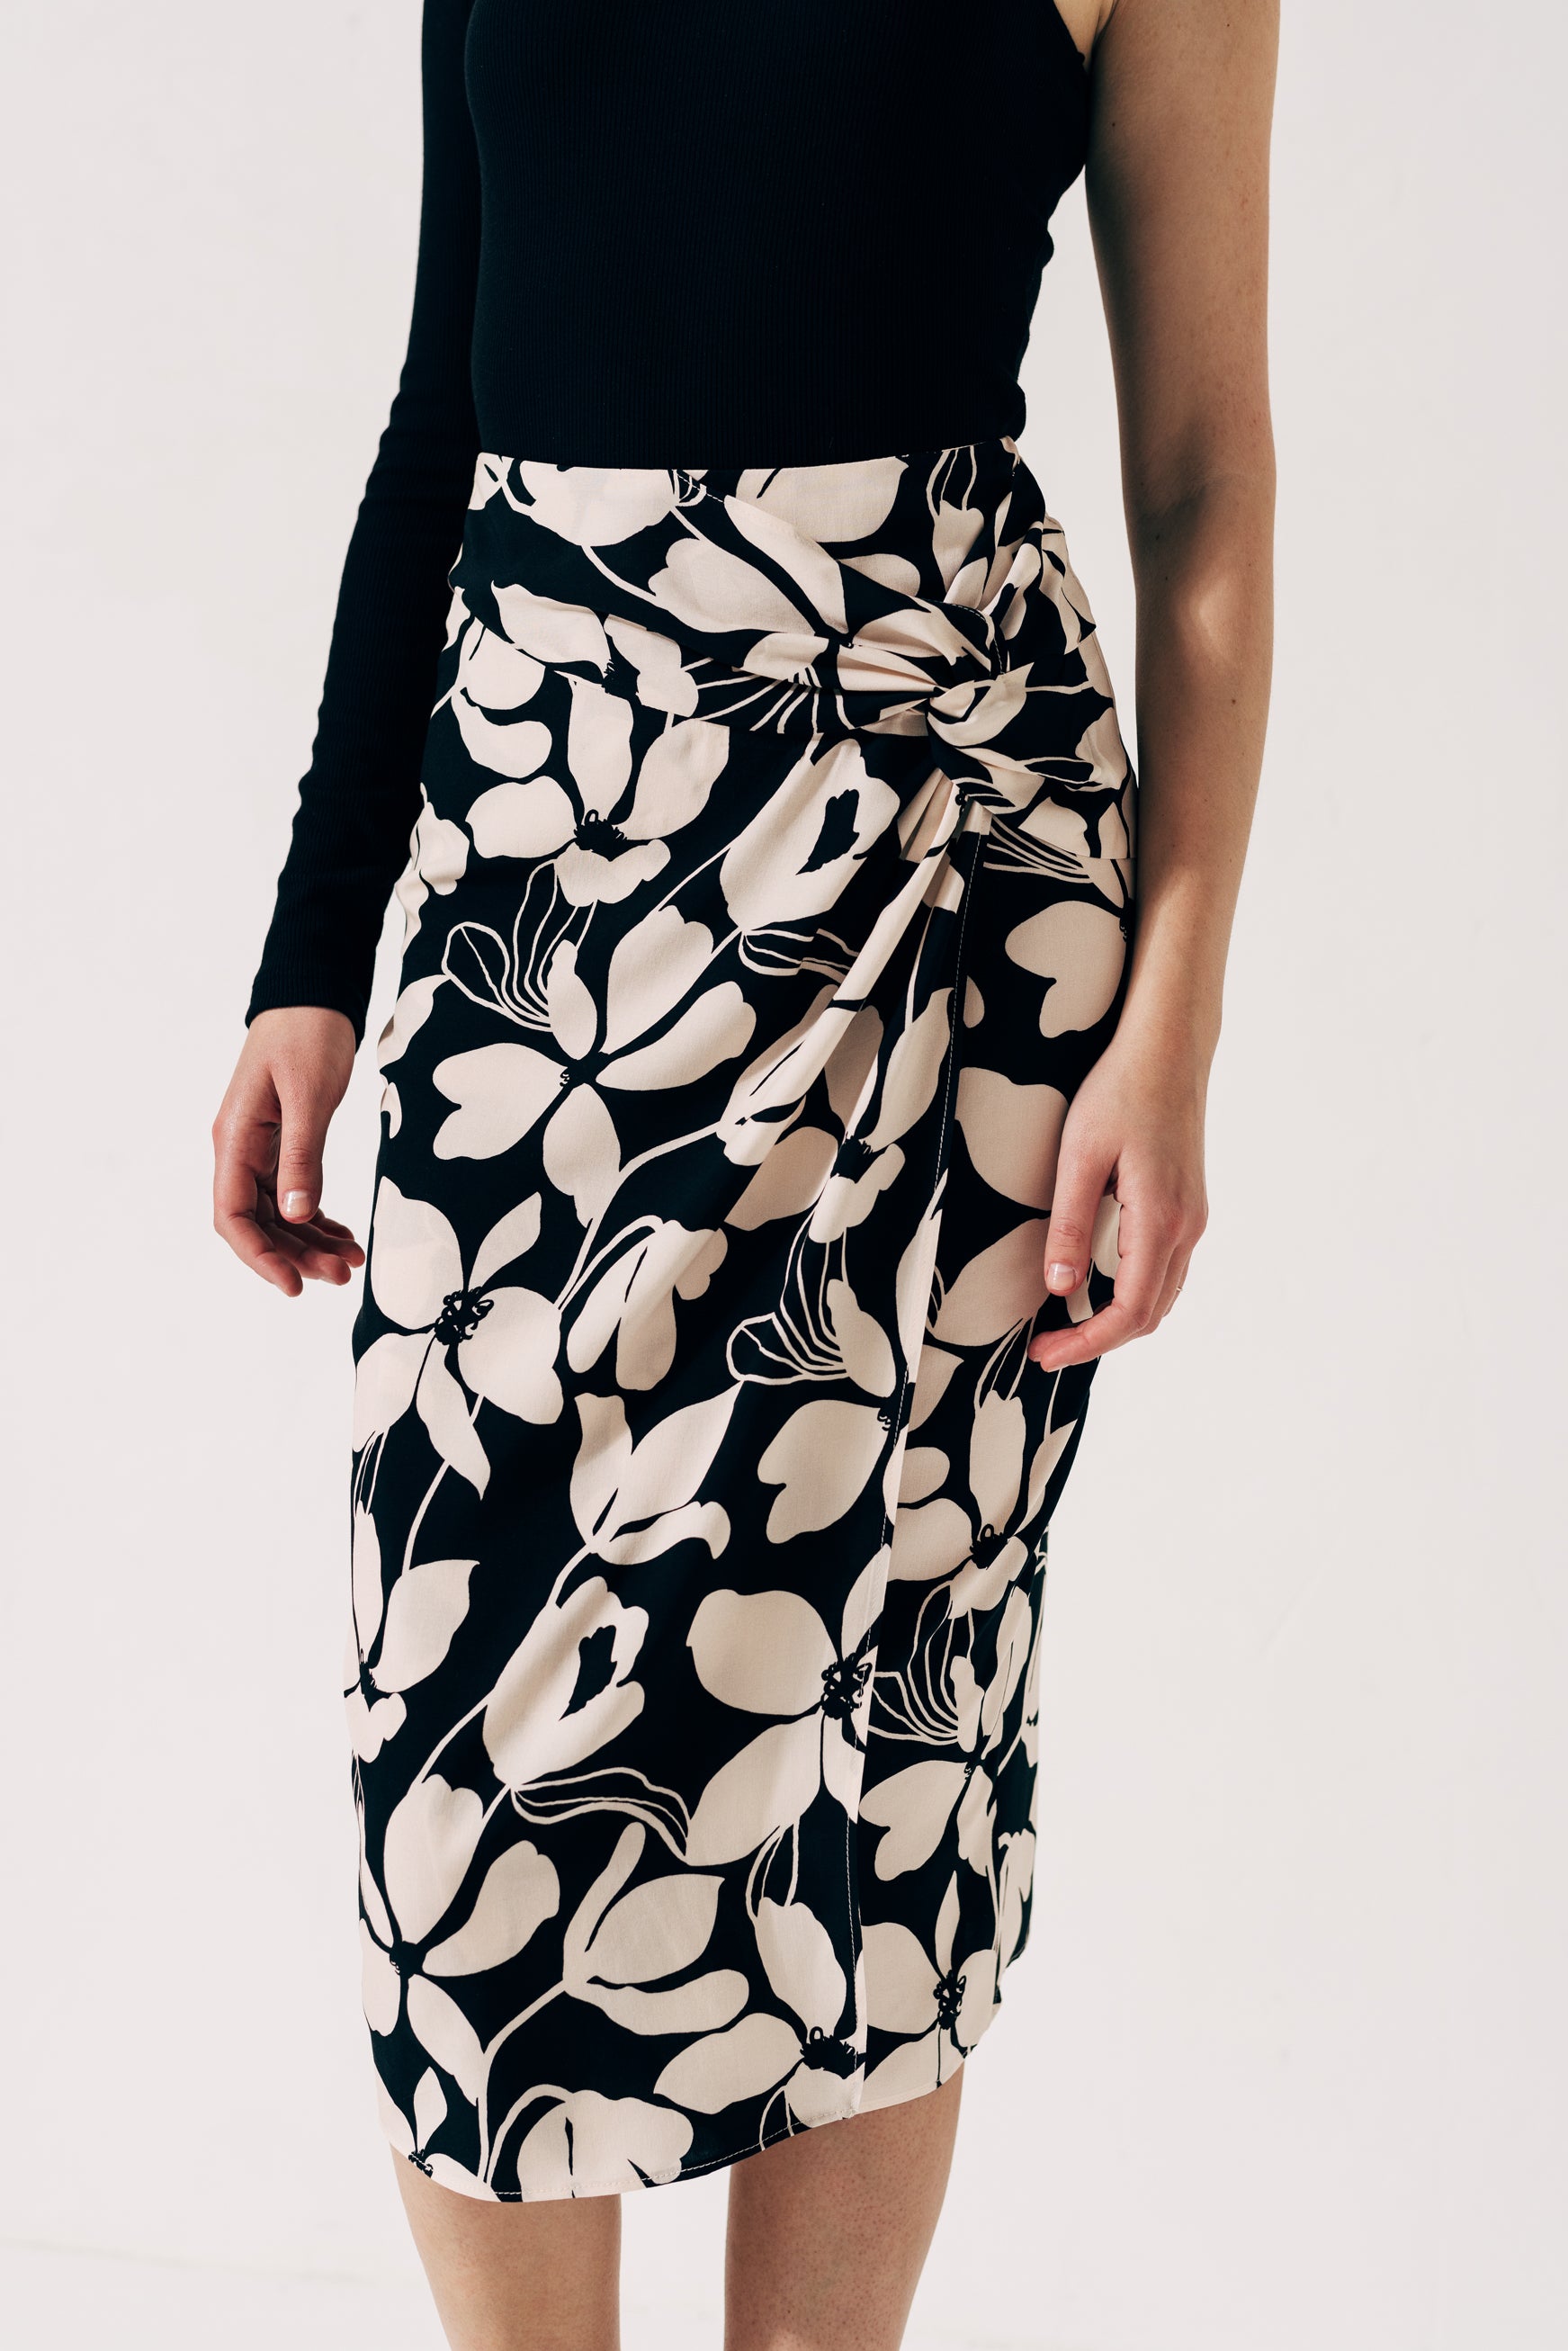 100% Viscose floral print midi skirt with side knot and slit